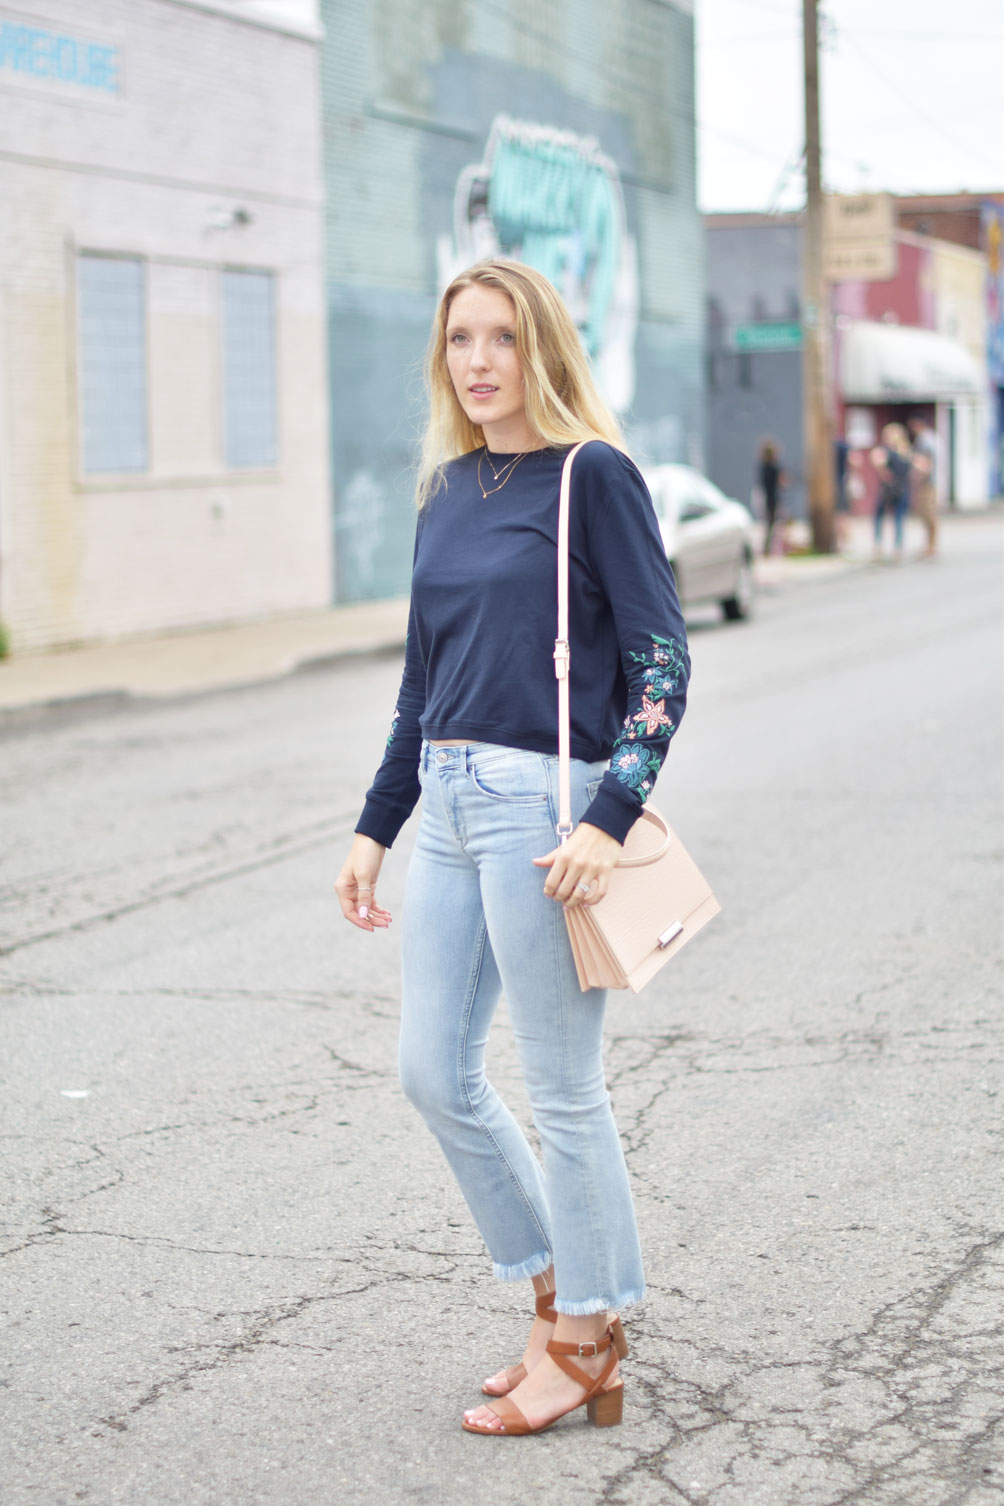 Leslie Musser wears kick flare denim with an embroidered sweatshirt and structured blush purse on one brass fox